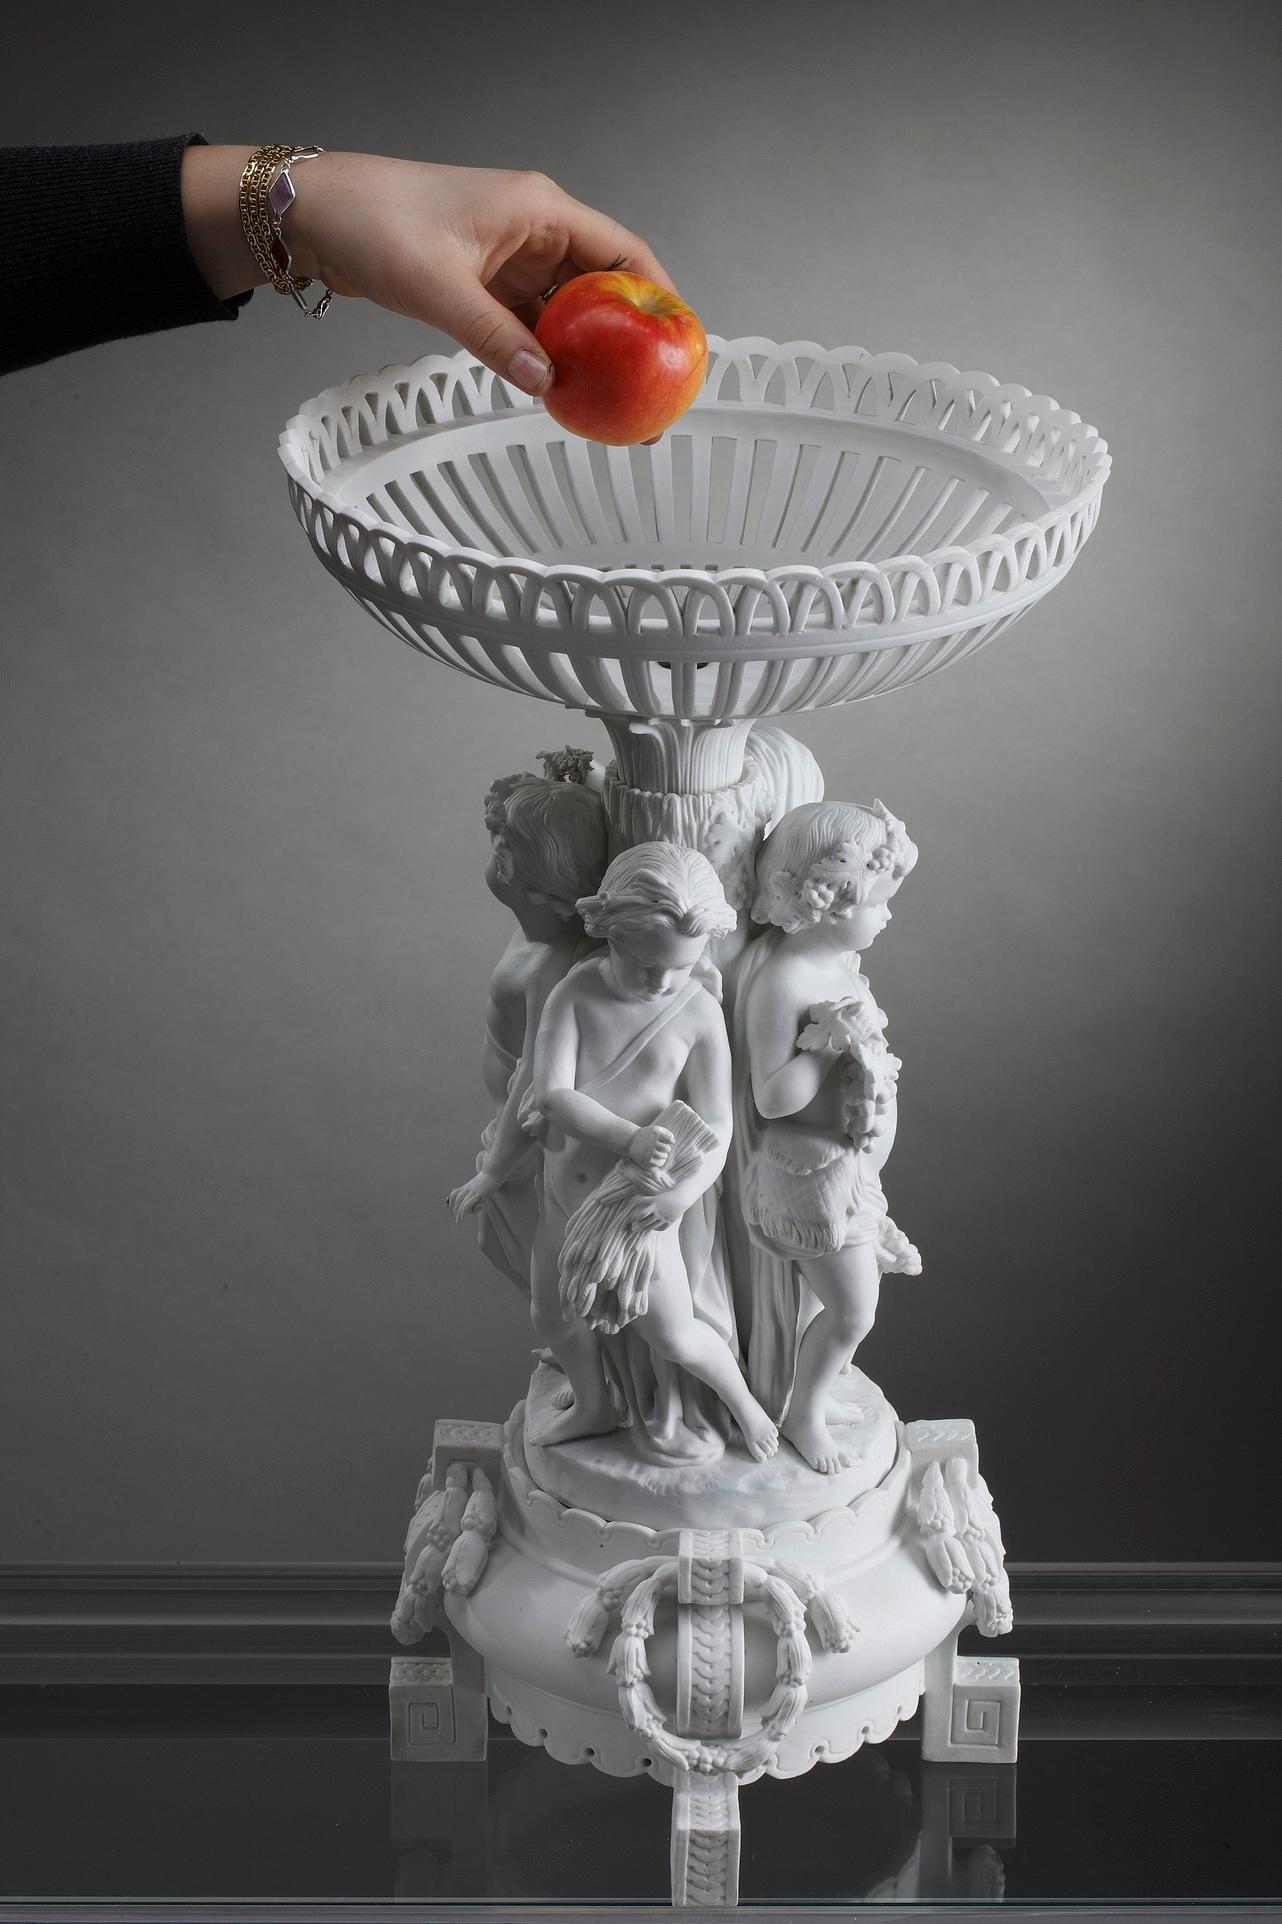 This large Meissen centerpiece crafted of biscuit exhibits the firm’s artistry in Neoclassical aesthetic. It features an allegorical group composed of four children detailing the Four Seasons: Spring wears a wreath and holds flowers, Summer has a